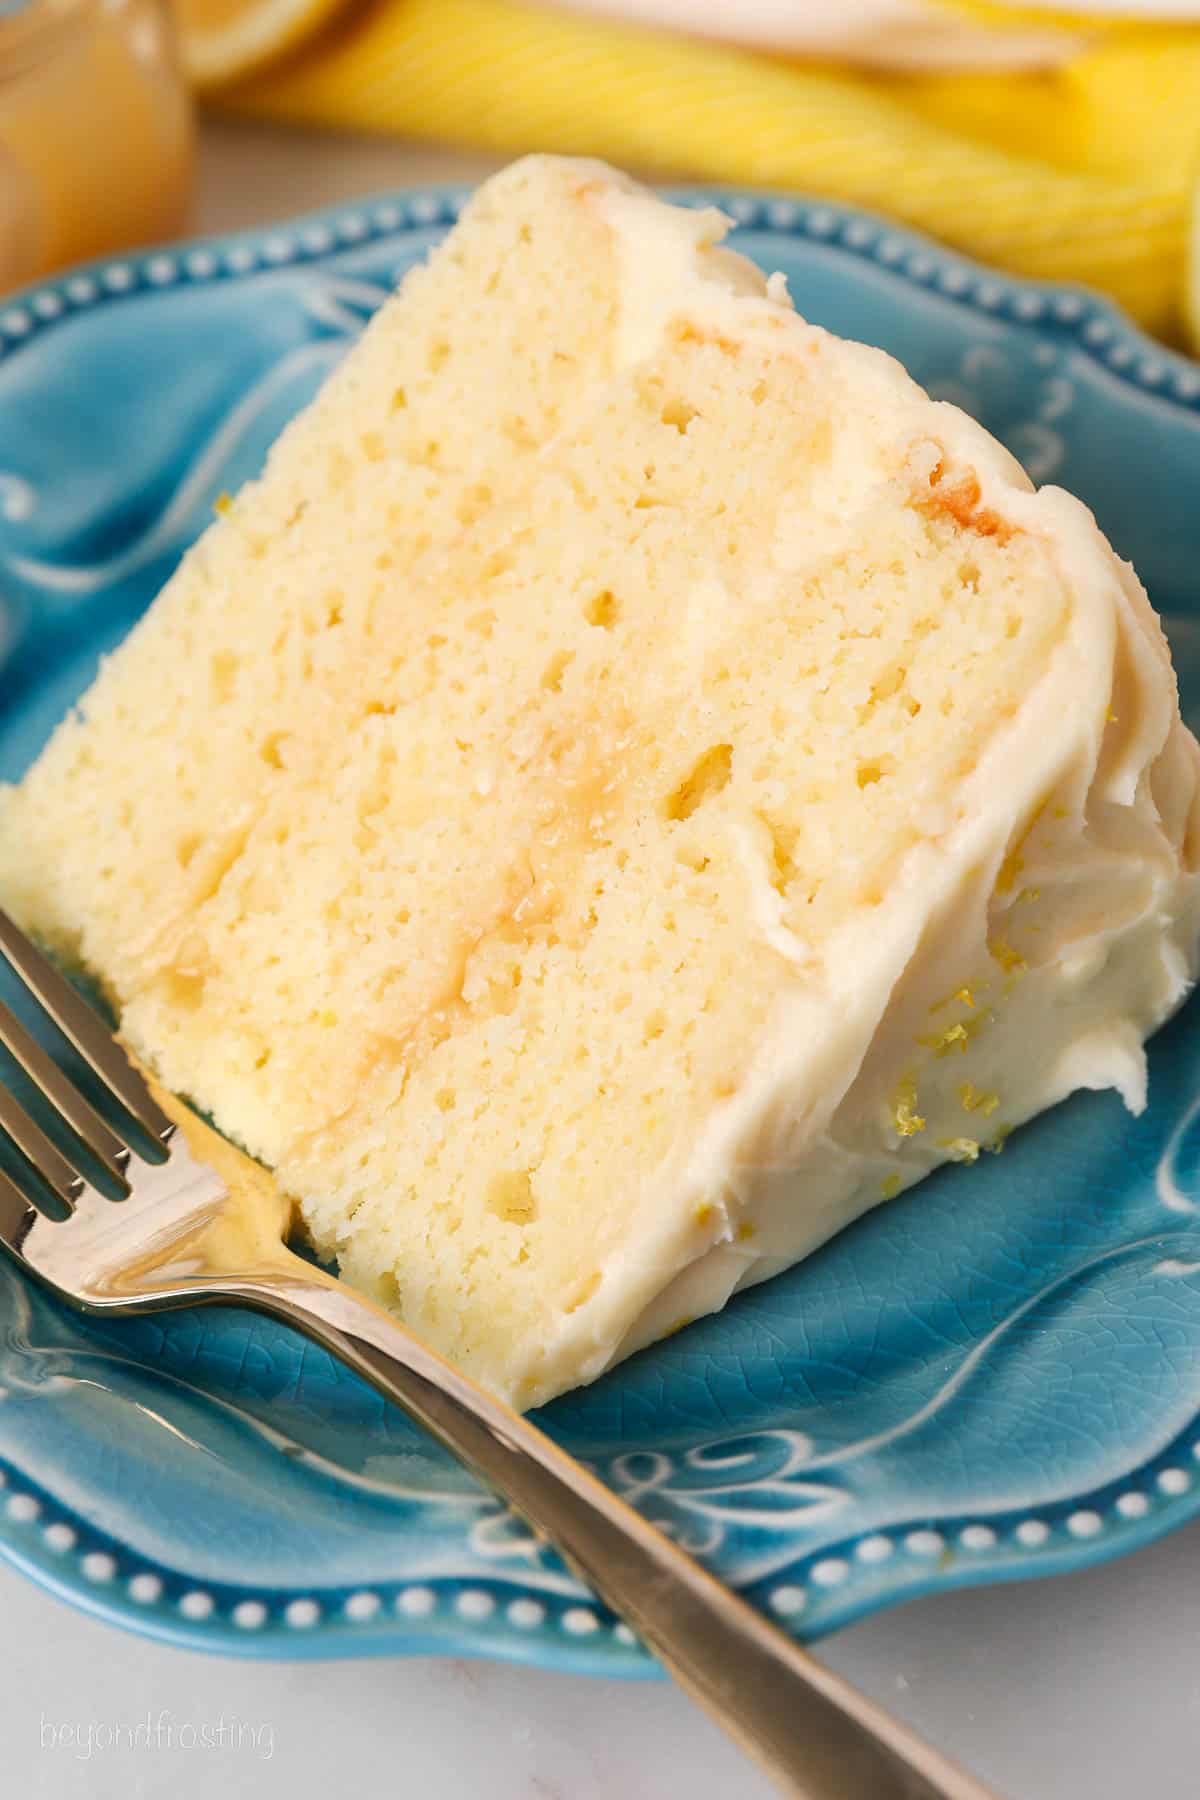 A slice of lemon layer cake on a blue plate next to a fork.